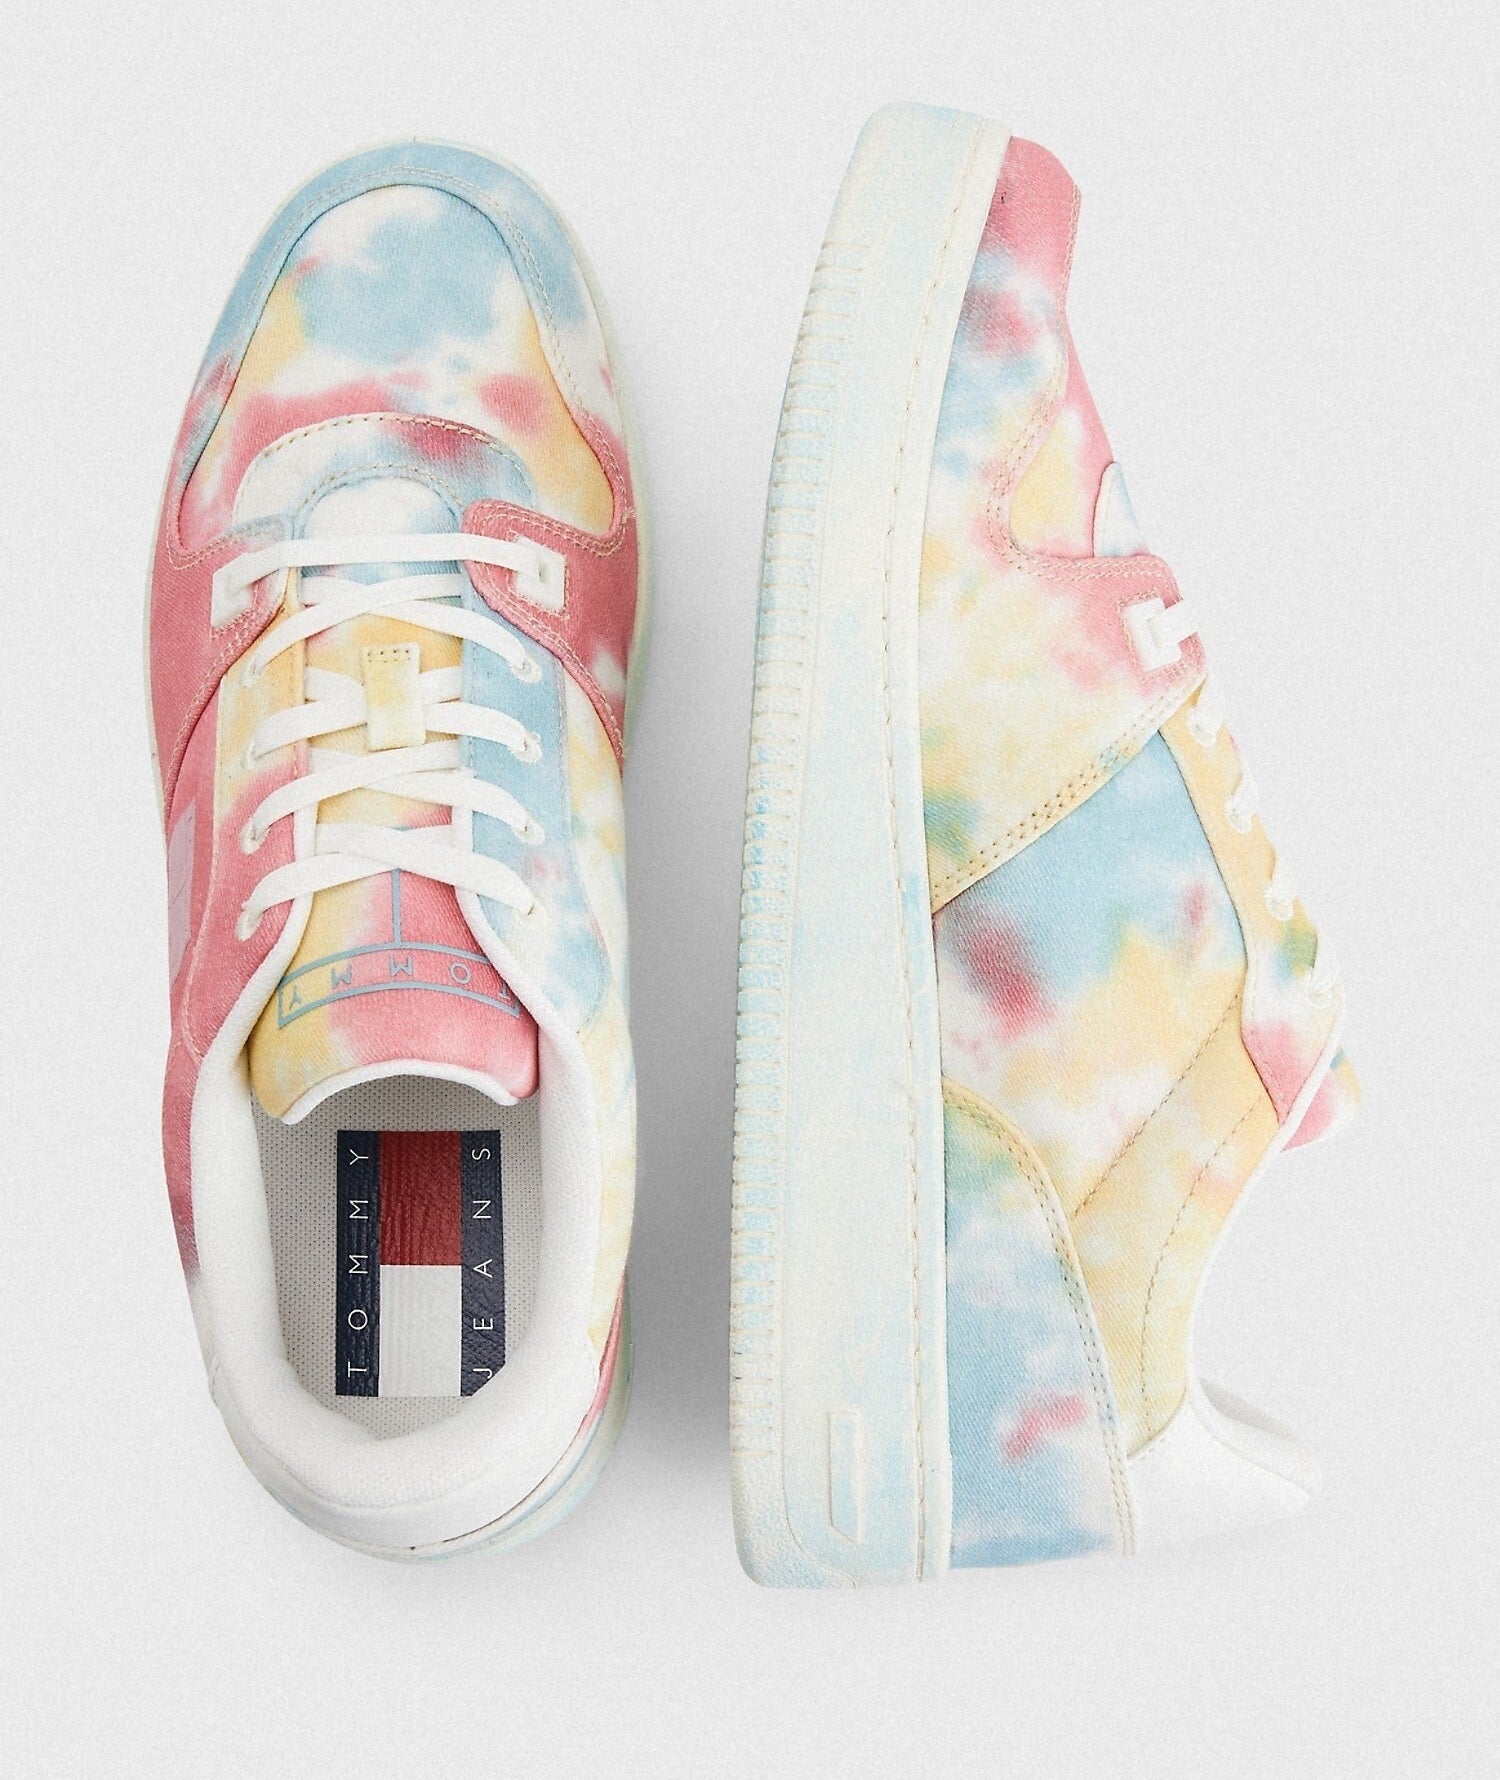 tie dye shoes with laces and cushioned sides